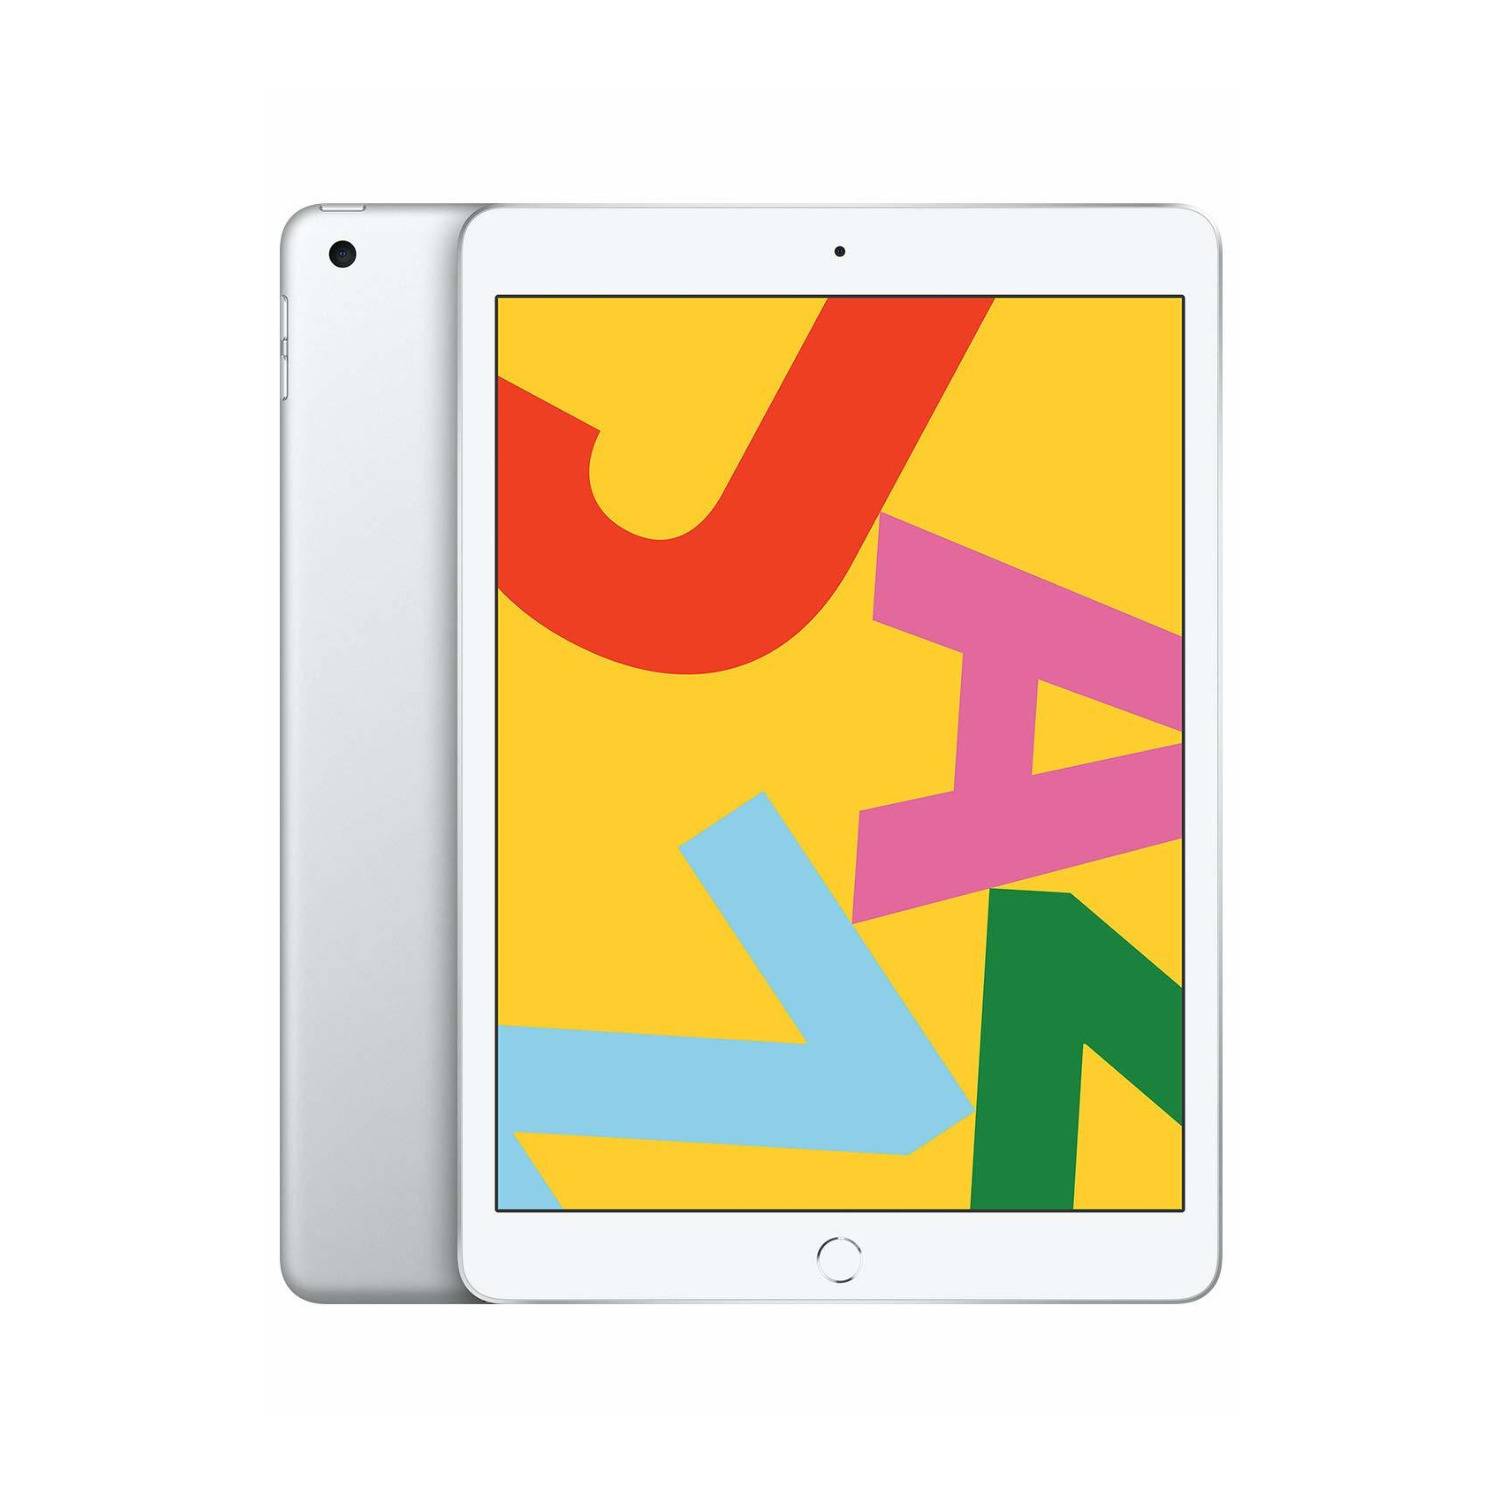 Apple iPad 10.2-Inch Tablet (Late 2019, 128GB, Wi-Fi Only, Silver)